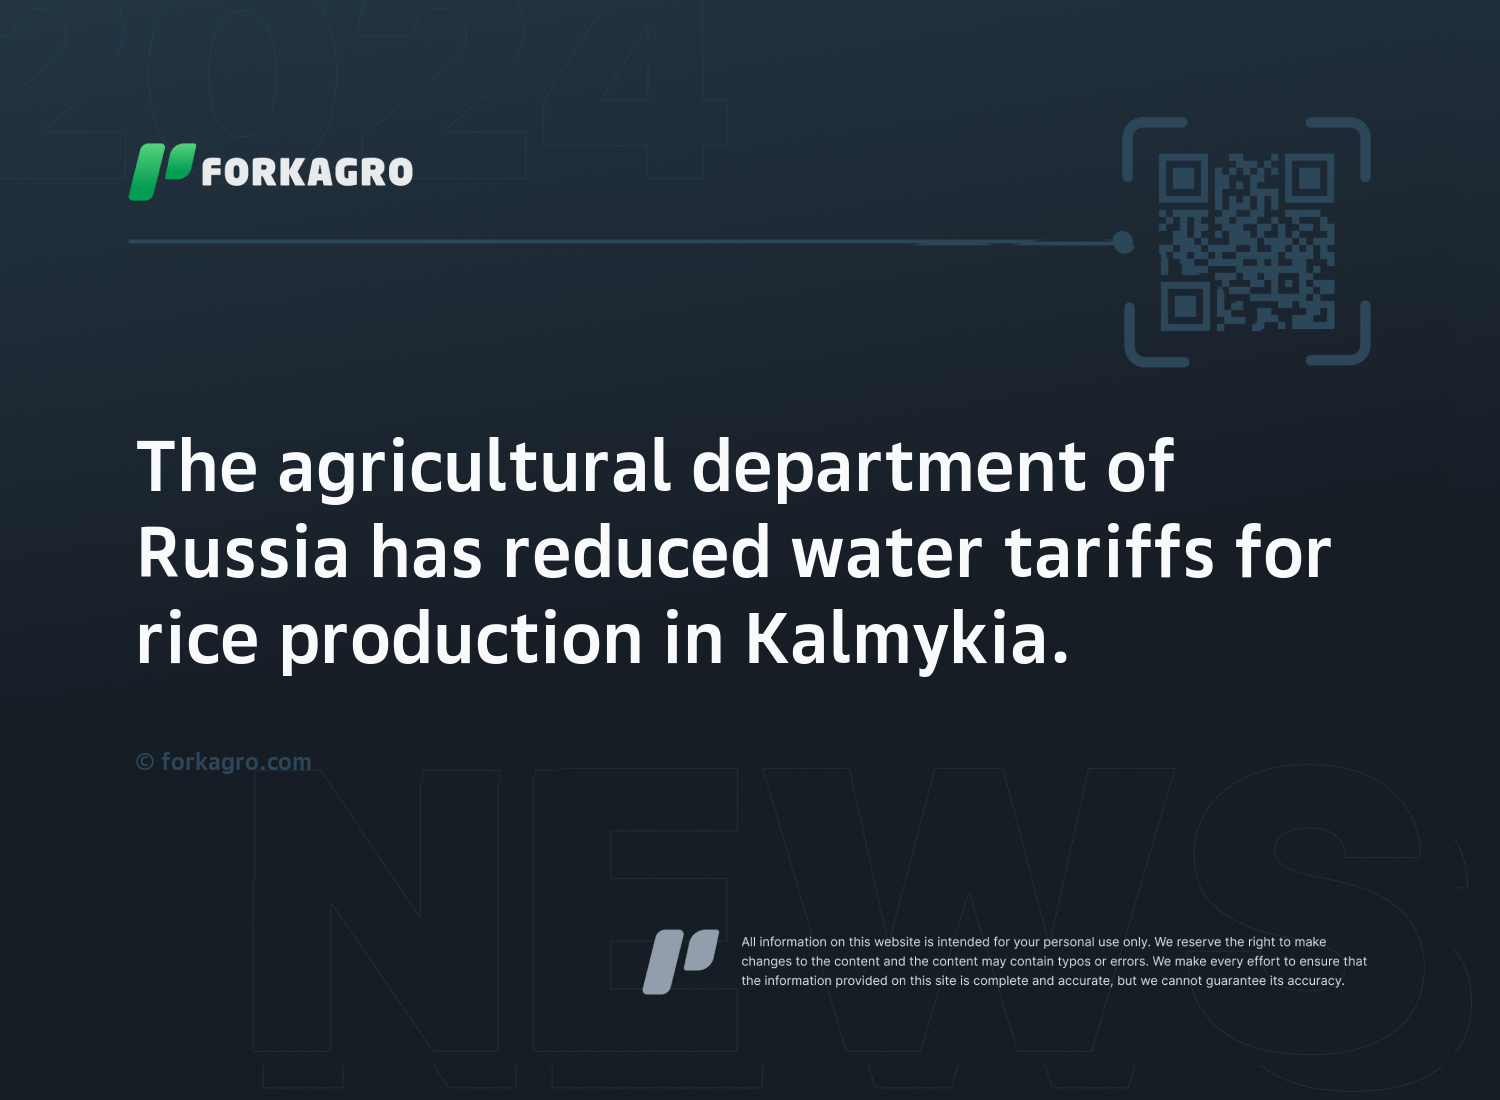 The agricultural department of Russia has reduced water tariffs for rice production in Kalmykia.